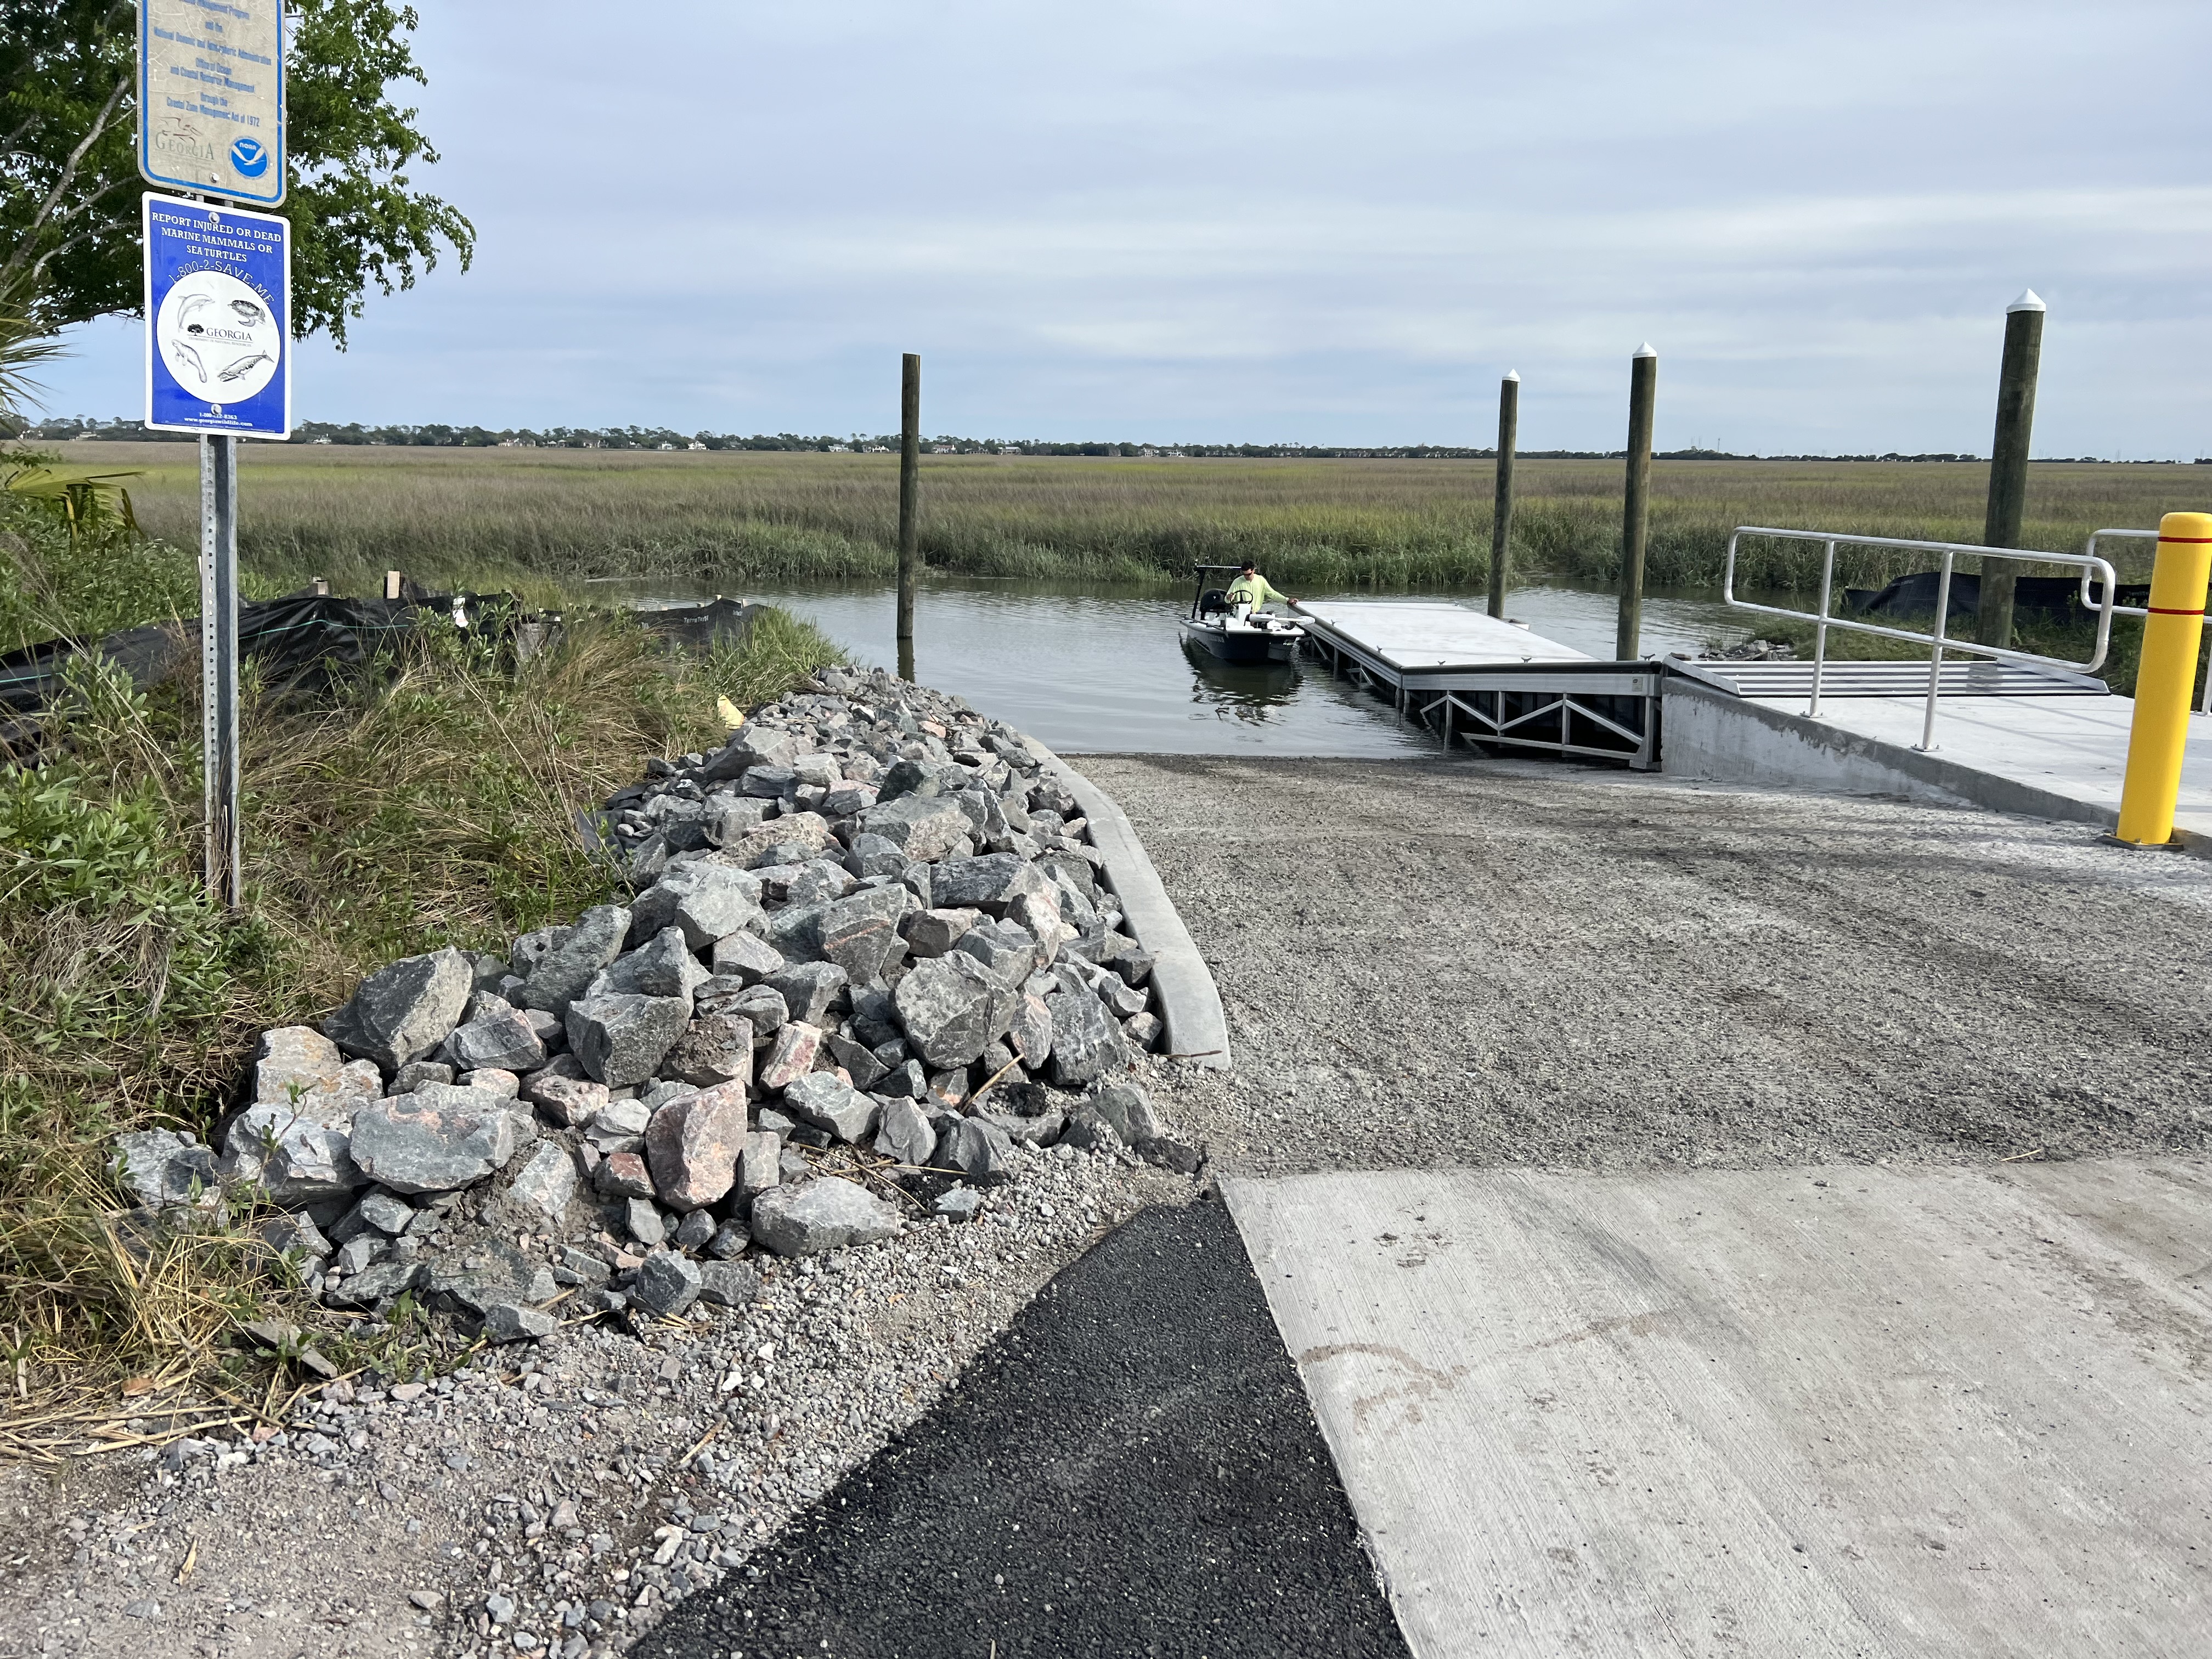 The Village Creek boat ramp on South Harrington Road on St. Simons Island. The ramp re-opened April 4 after approximately 90 days of construction to replace the ramp and add a new courtesy dock. Provided photo by Dave Austin/Glynn County government